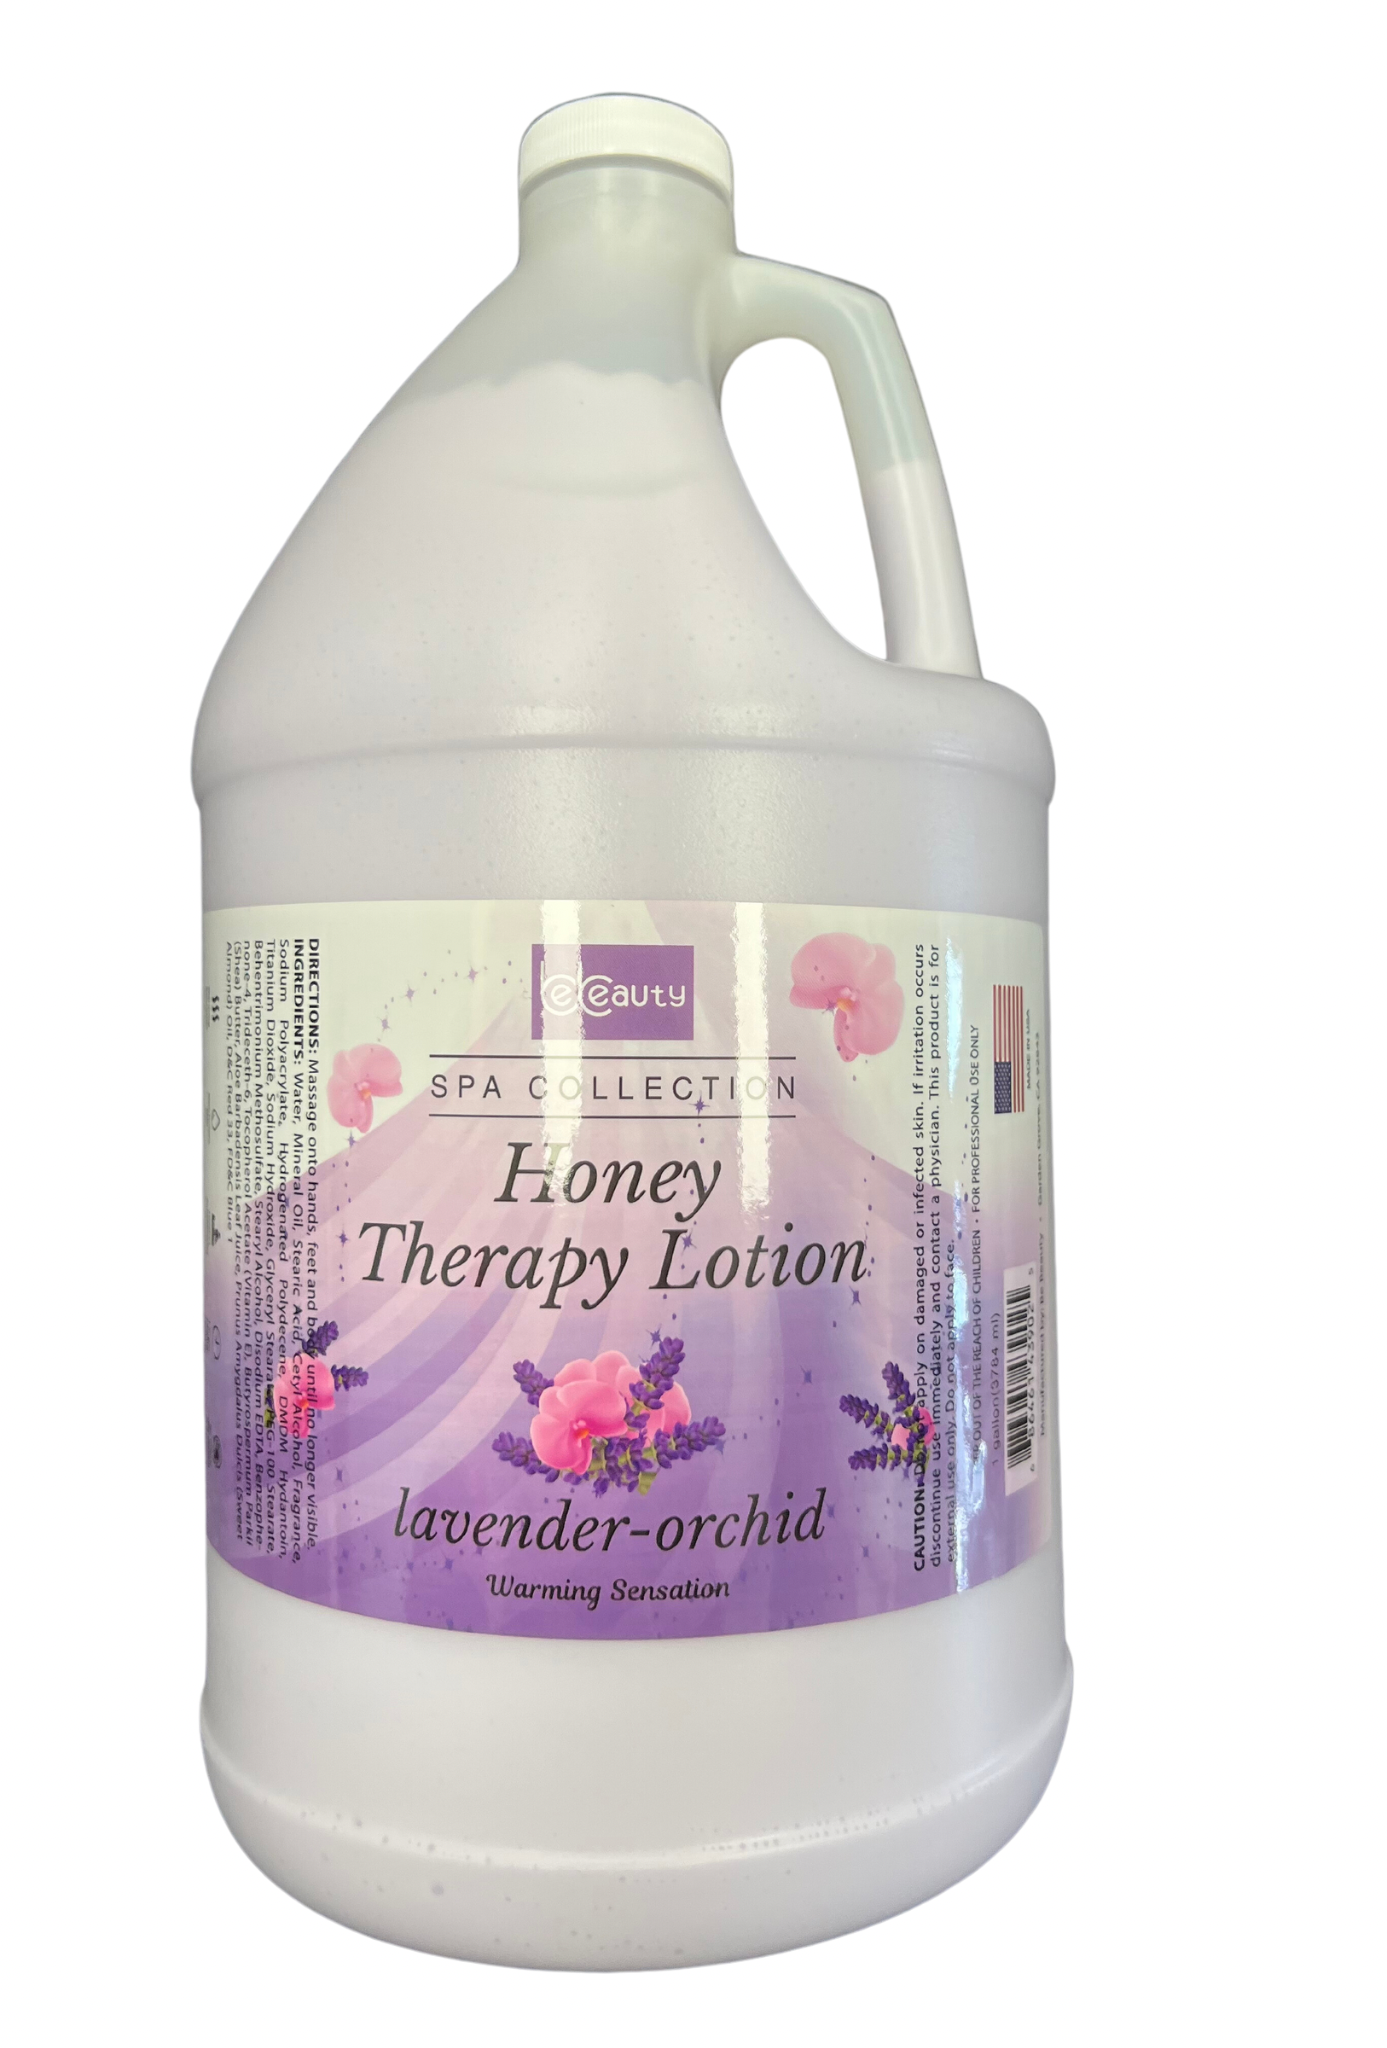 Honey Therapy Lotion Lavender Orchid 1 Gallon | Be Beauty